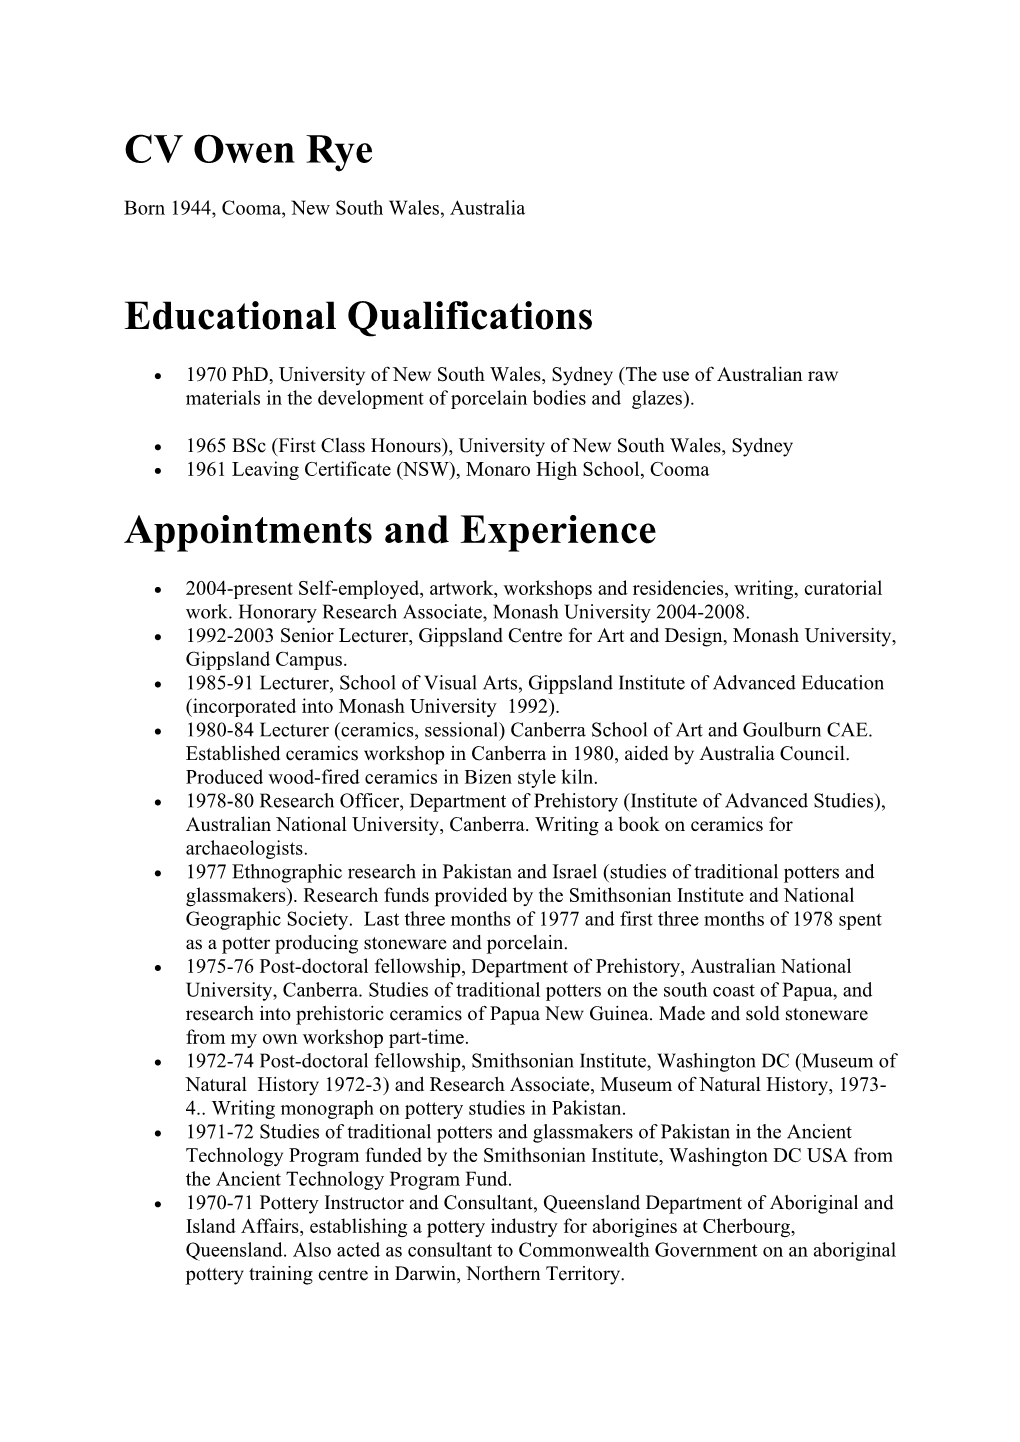 CV Owen Rye Educational Qualifications Appointments And